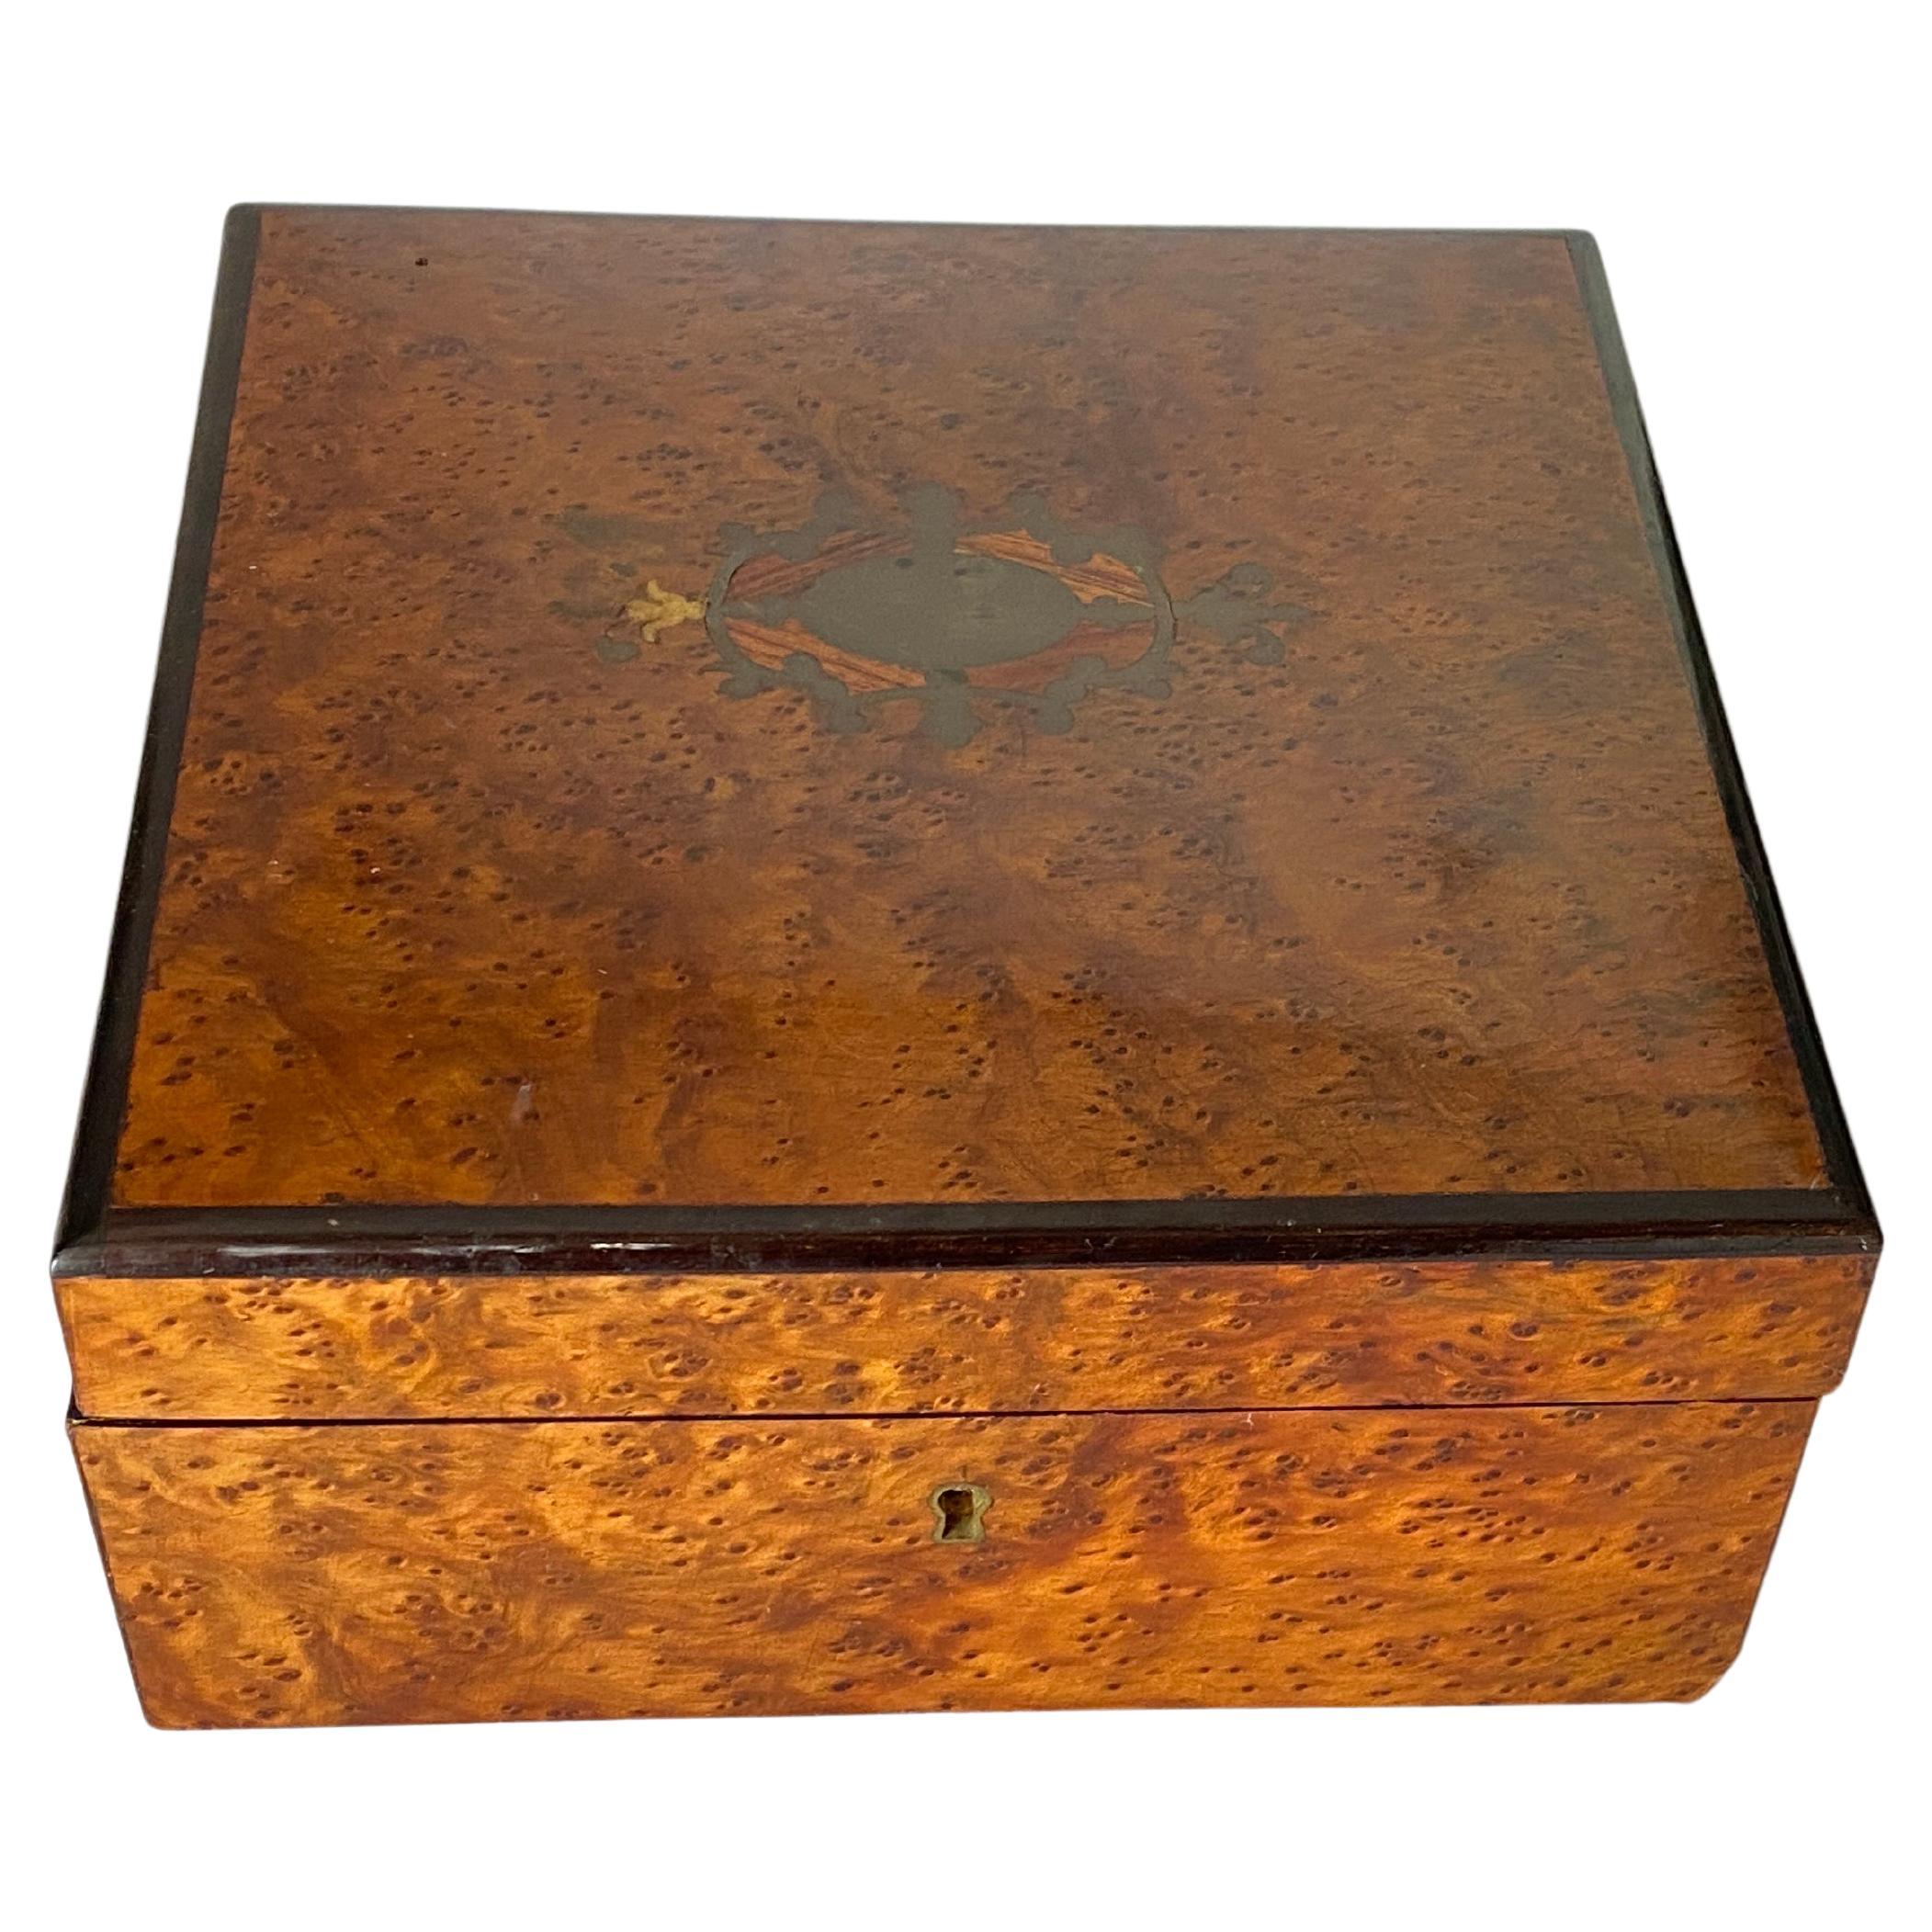 Box in Burled Wood and Silk Brown Color, France, 19th Century